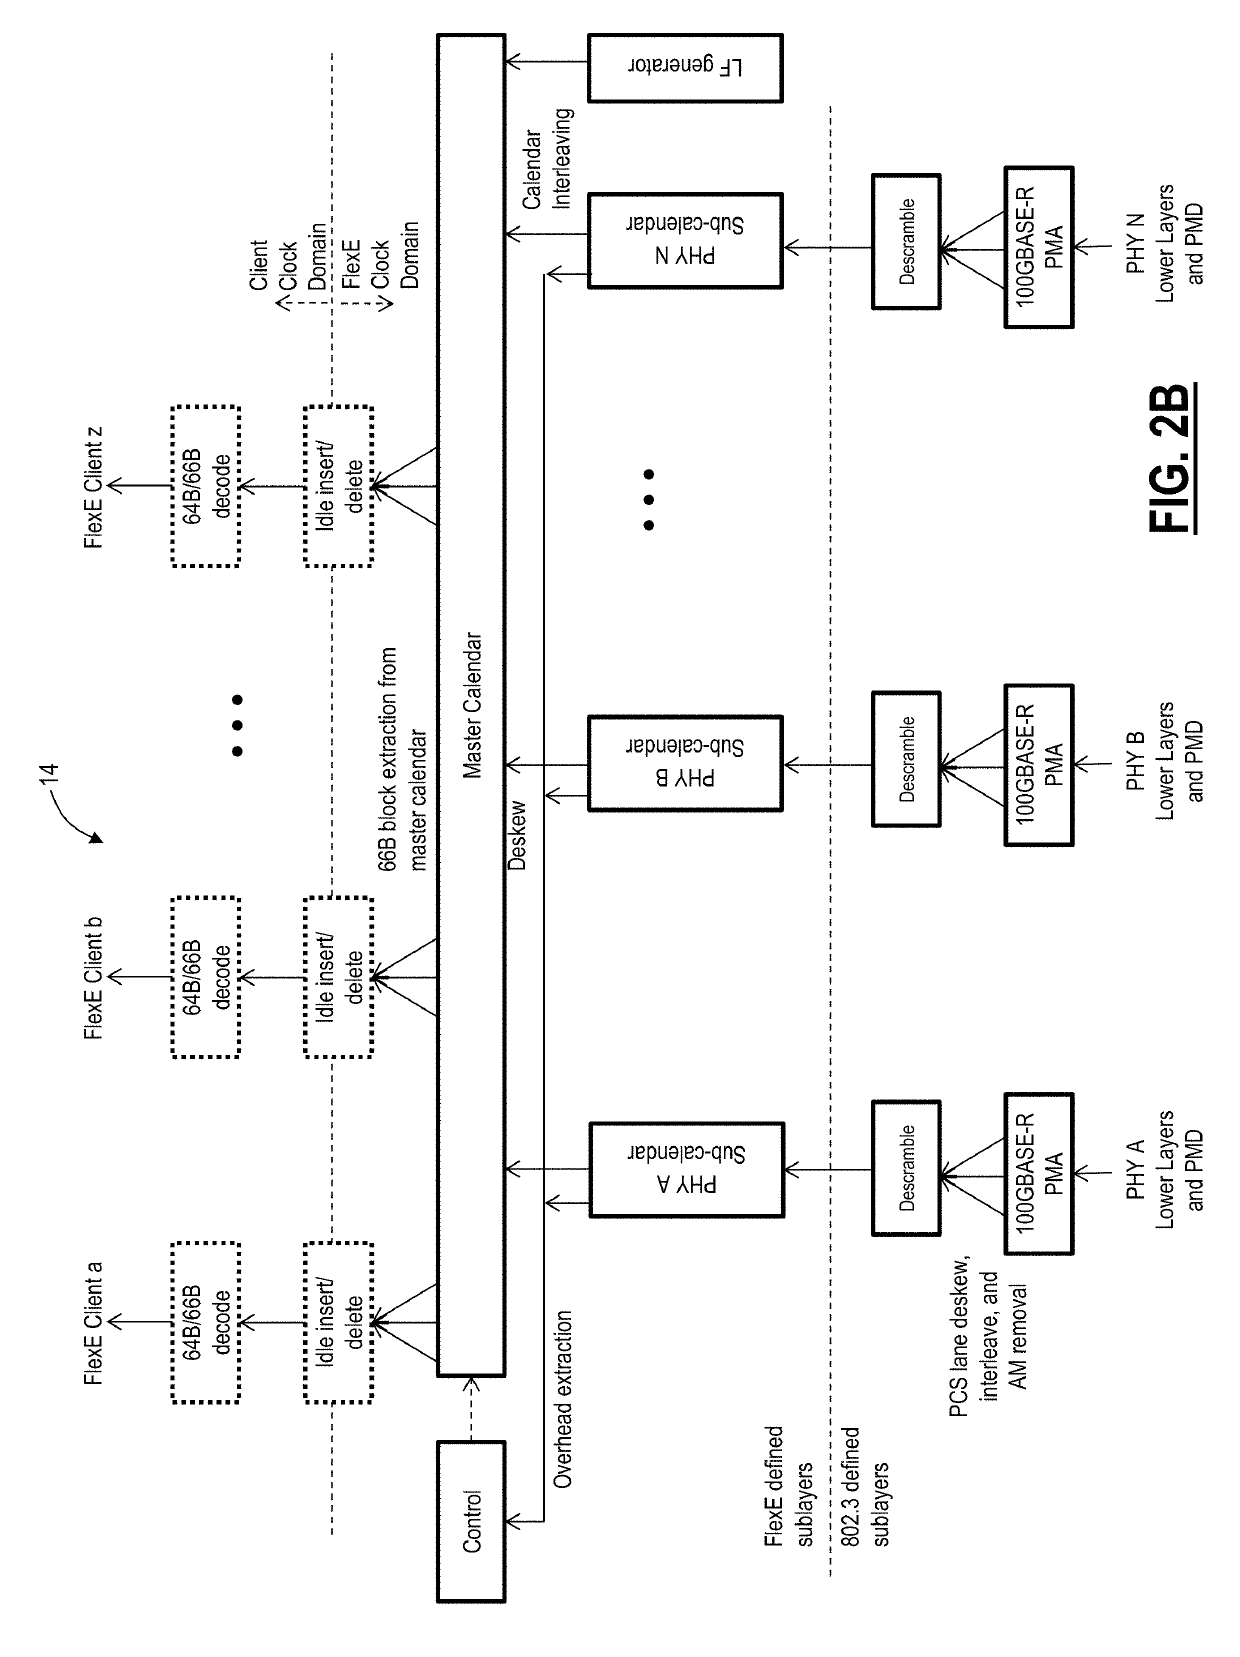 Flexible ethernet encryption systems and methods